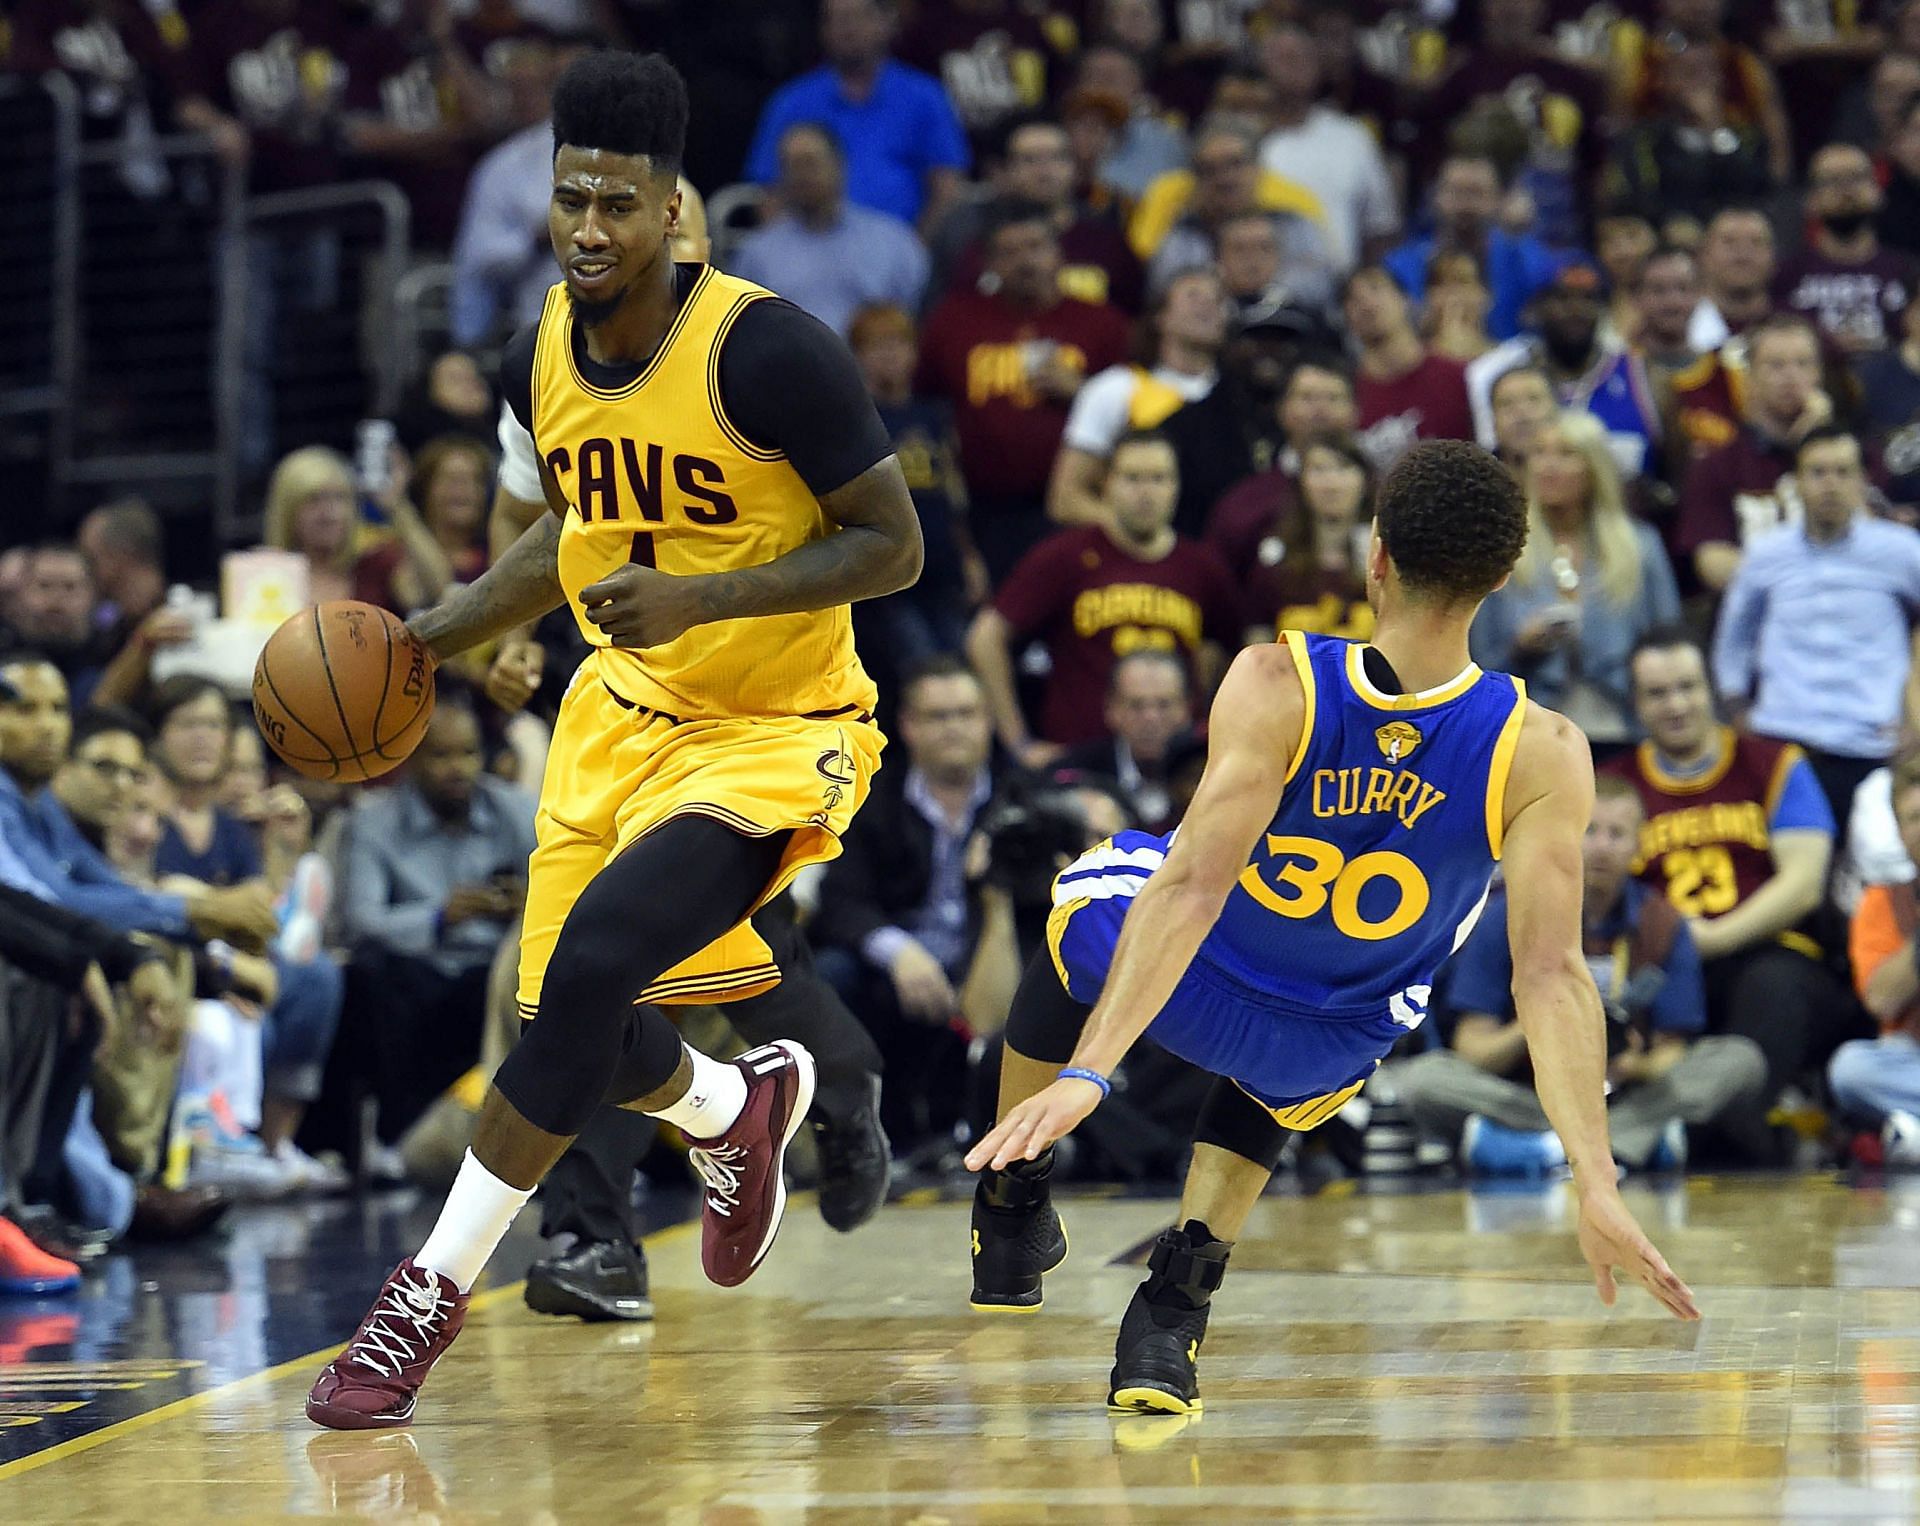 Iman Shumpert opened up on why he hated playing against the Golden State Warriors. [Photo: WKYC]